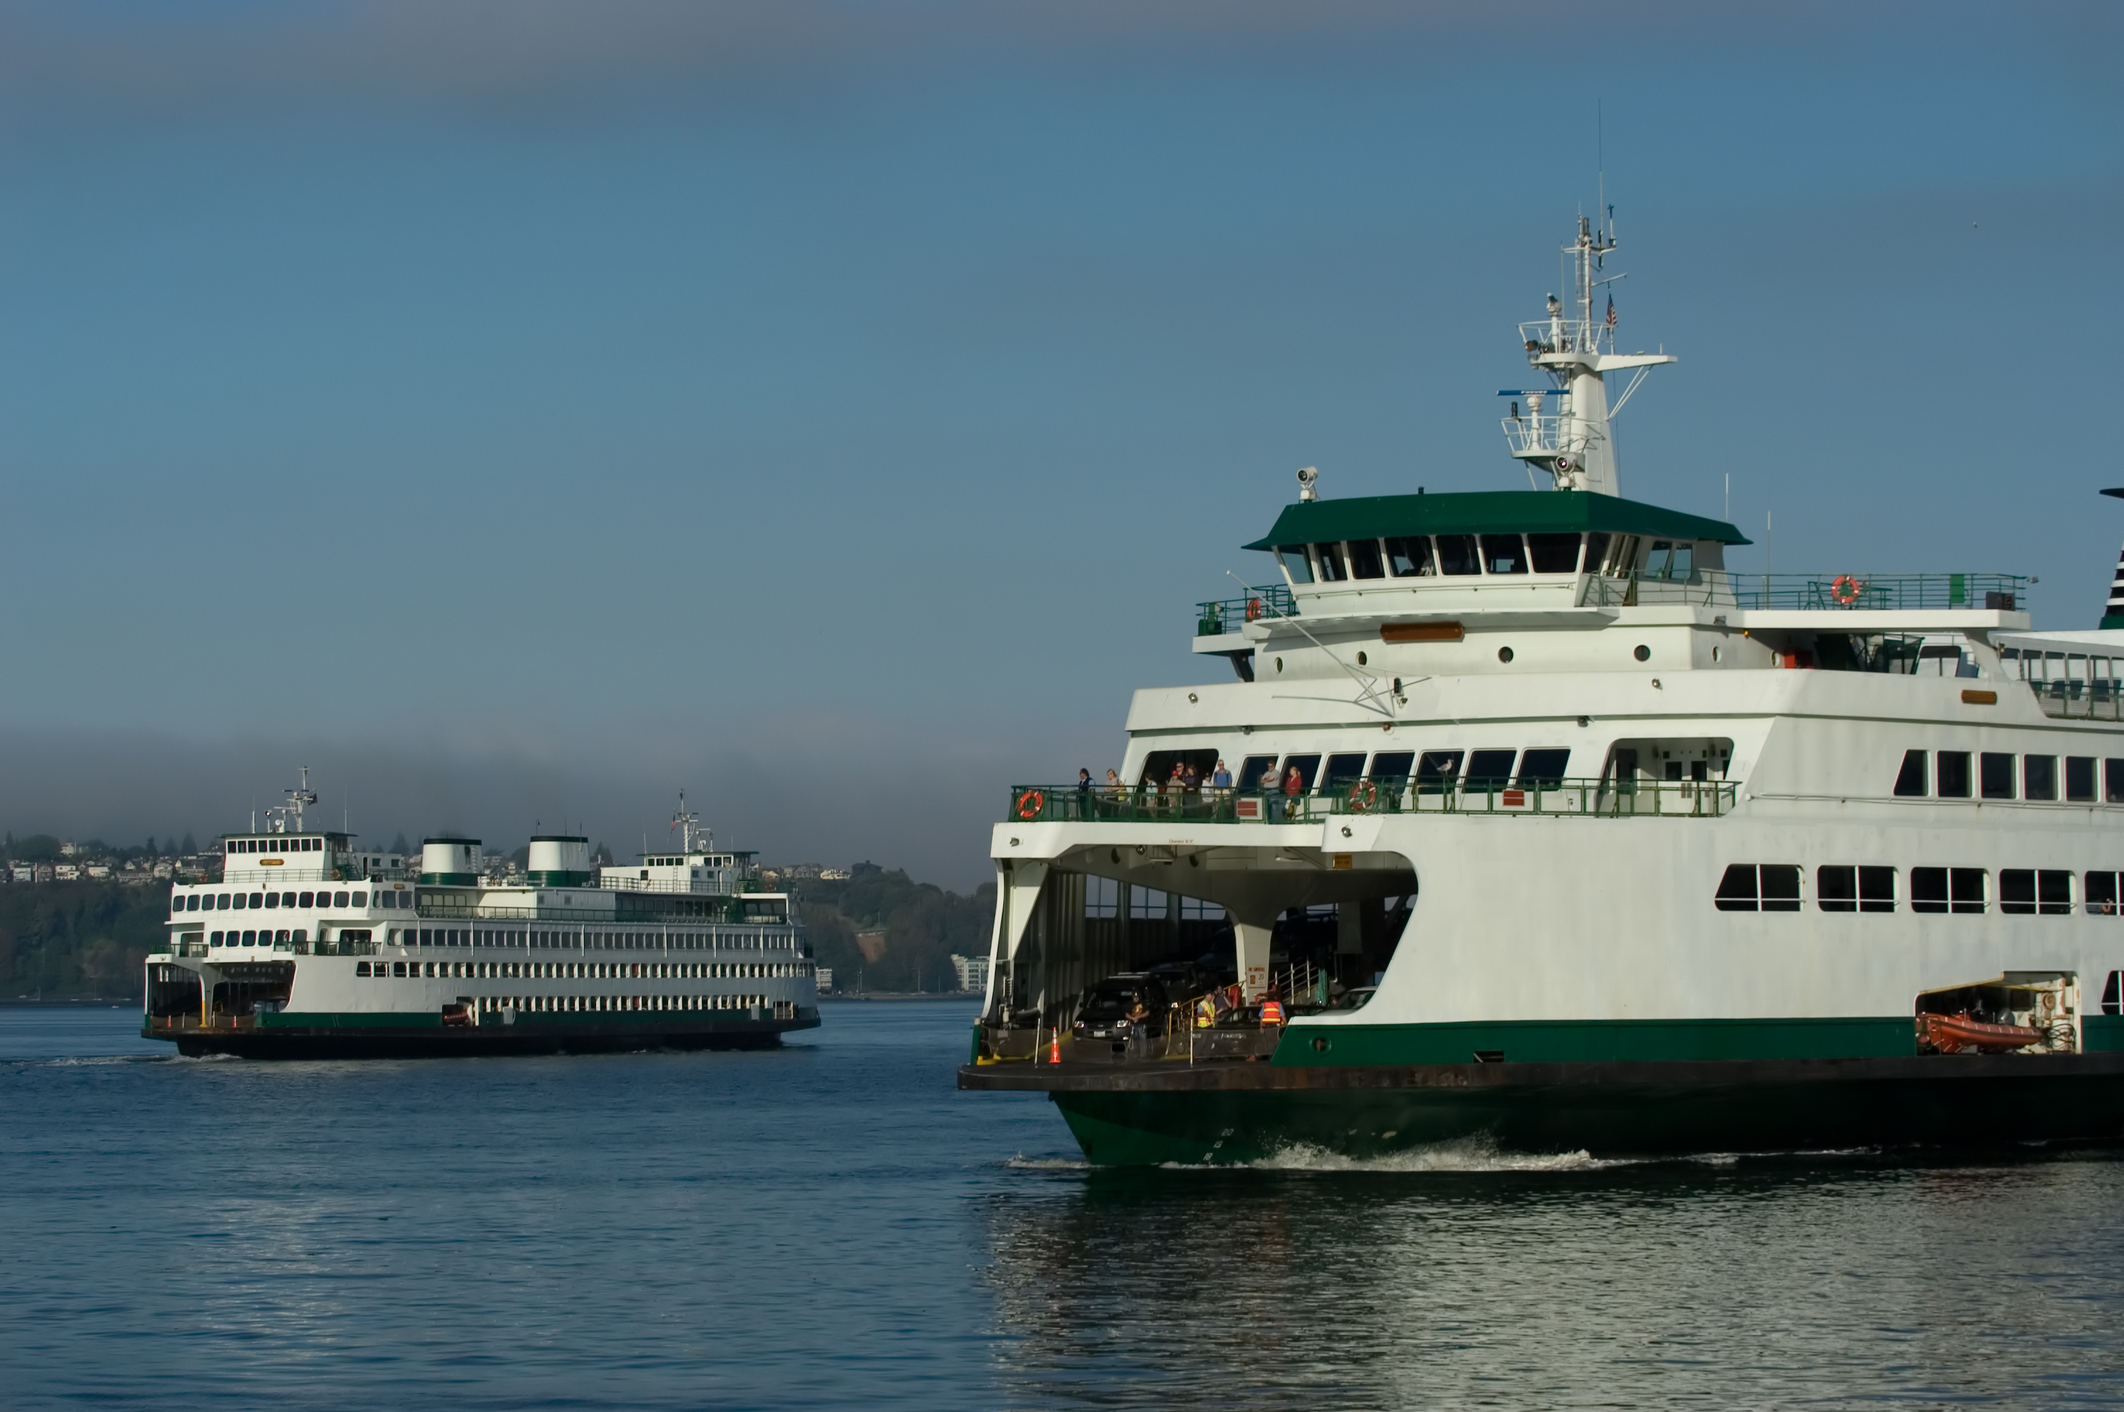 Vashon Island Ferry Schedule Can we talk about the two boat schedule